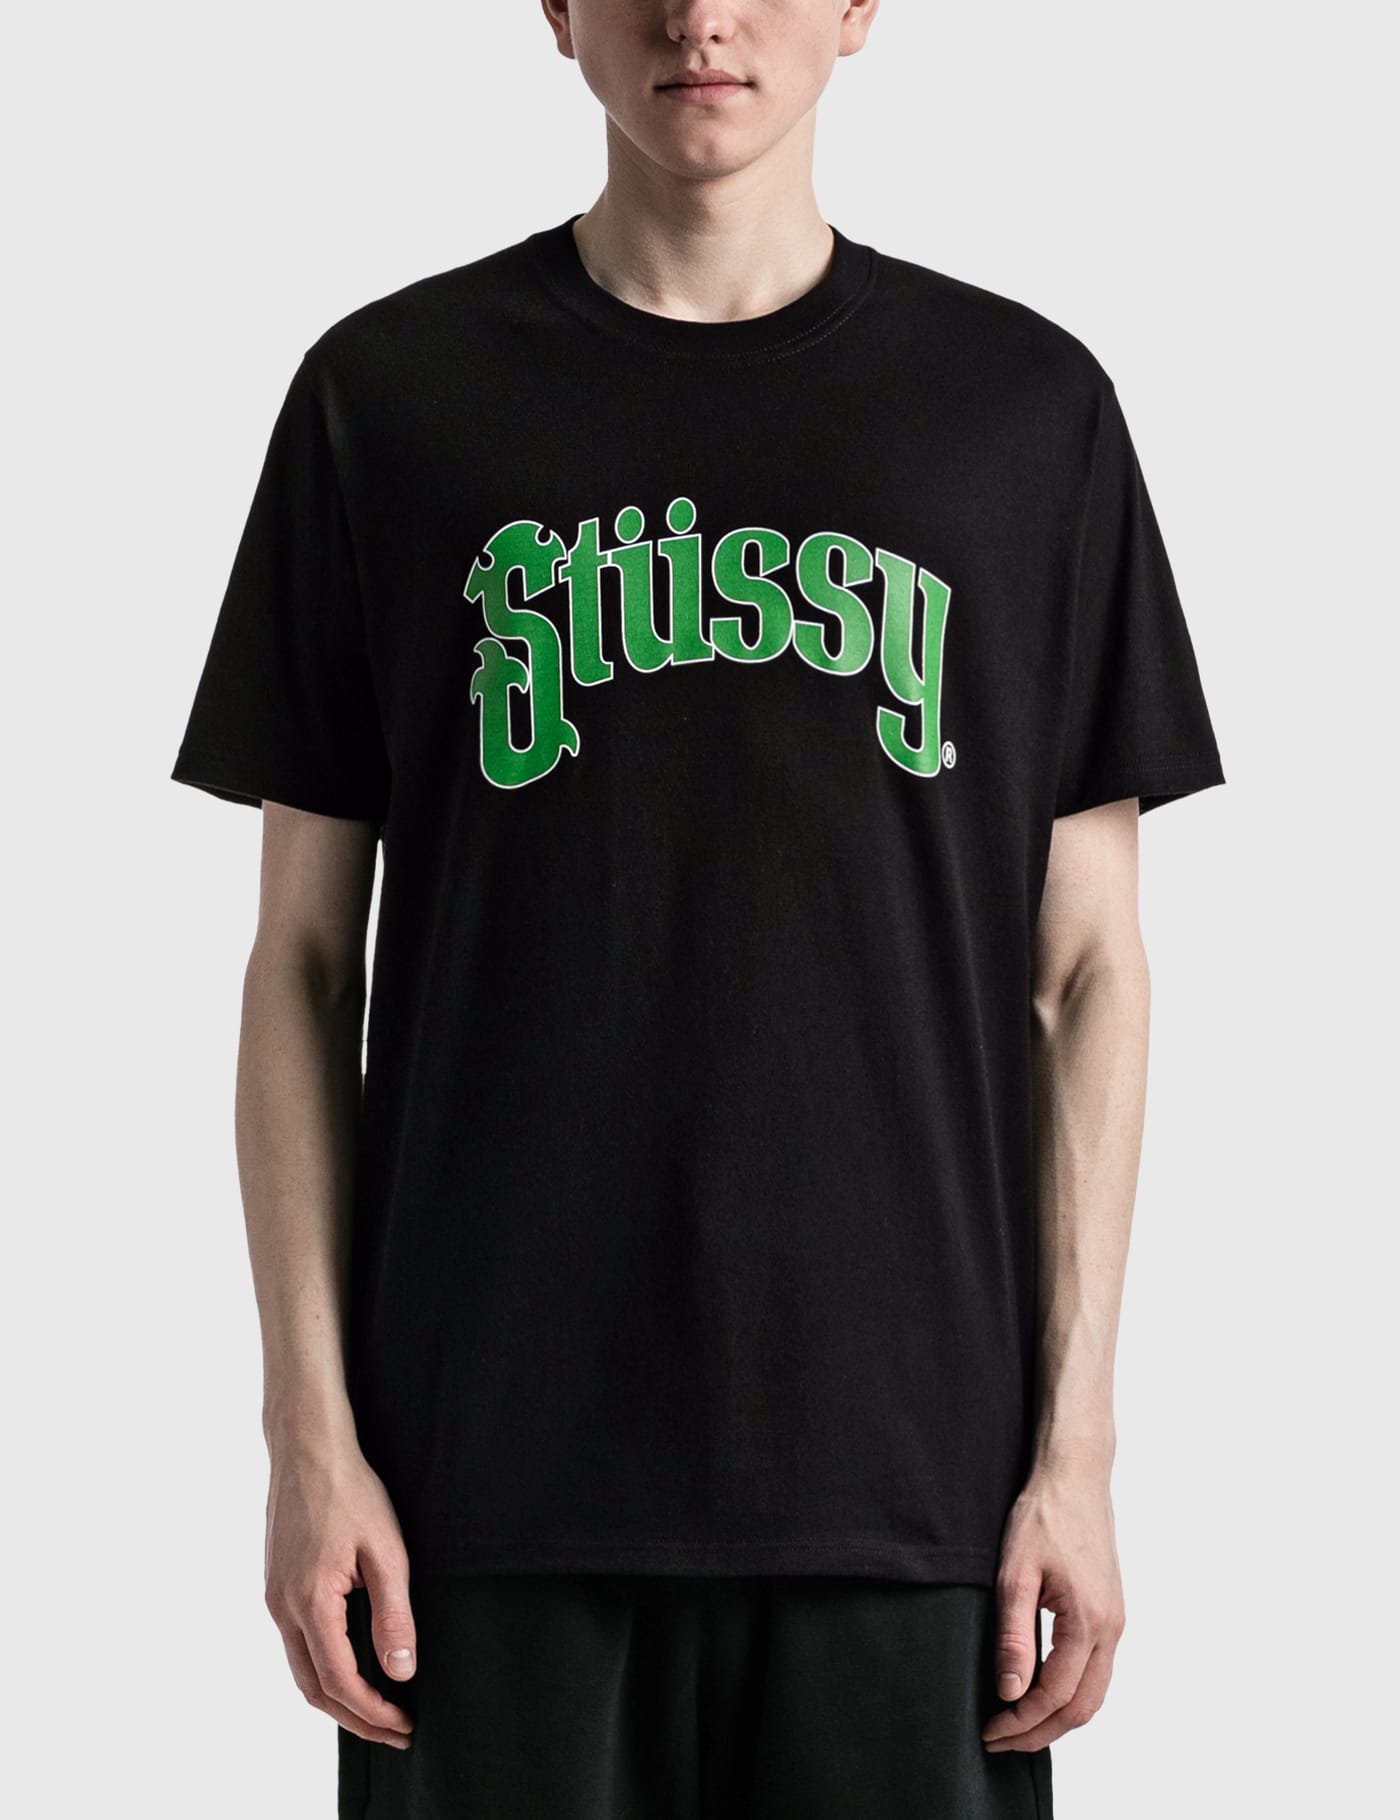 Stüssy - Soda T-shirt | HBX - Globally Curated Fashion and 